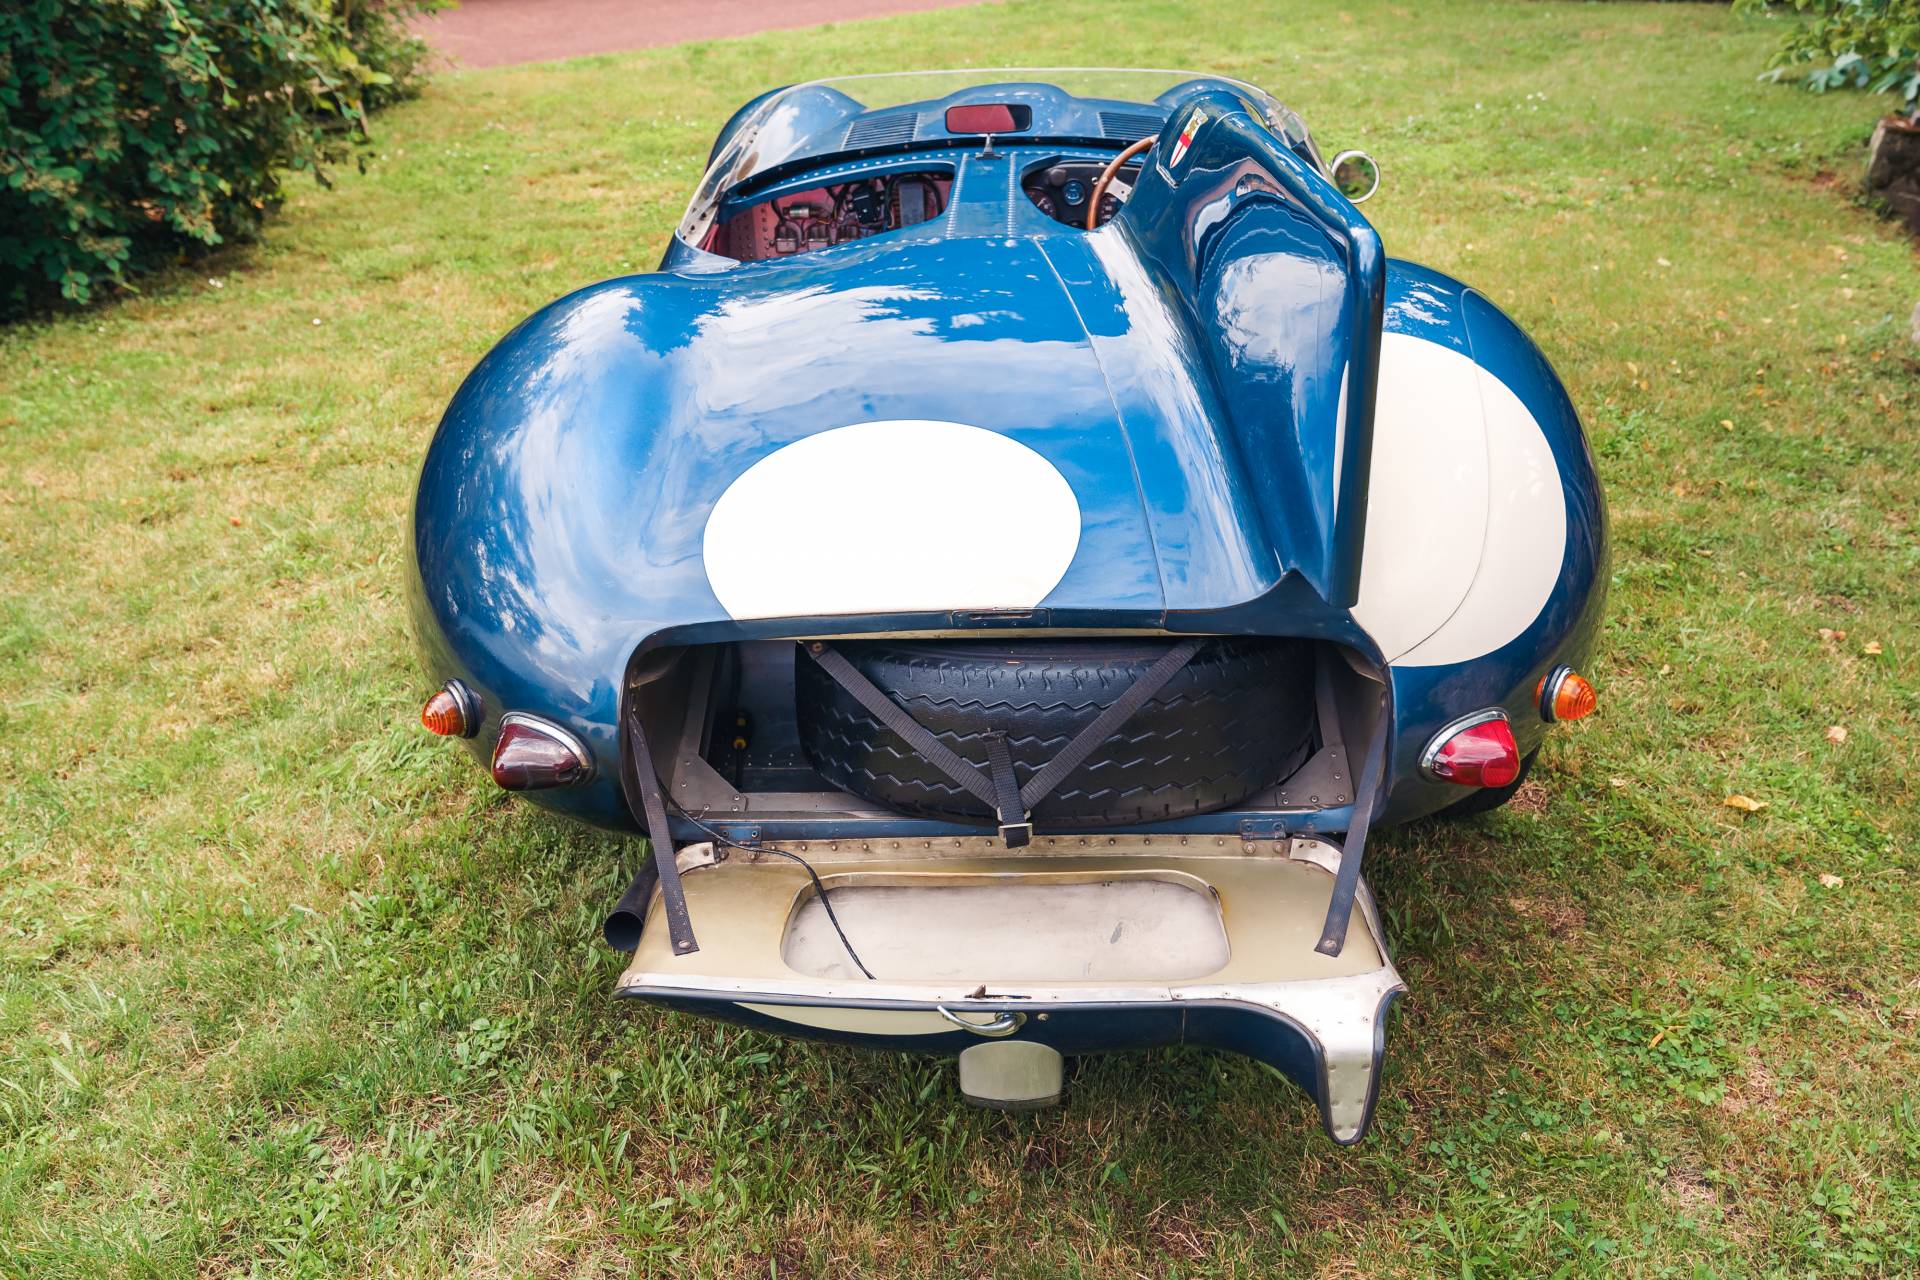 For Sale: Deetype D-Type (1979) offered for €180,000